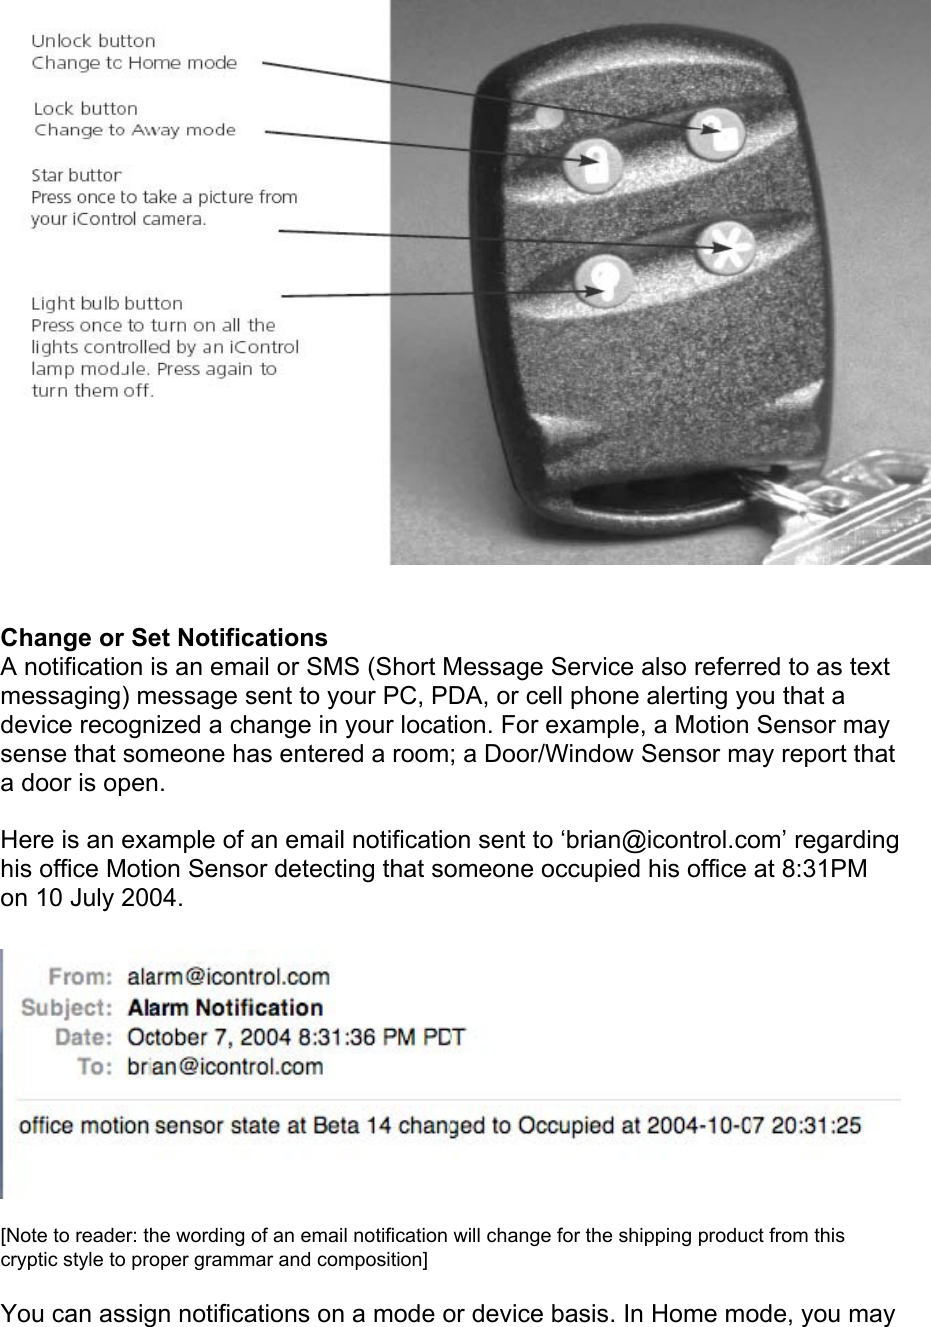  Change or Set Notifications  A notification is an email or SMS (Short Message Service also referred to as text messaging) message sent to your PC, PDA, or cell phone alerting you that a device recognized a change in your location. For example, a Motion Sensor may sense that someone has entered a room; a Door/Window Sensor may report that a door is open.  Here is an example of an email notification sent to ‘brian@icontrol.com’ regarding his office Motion Sensor detecting that someone occupied his office at 8:31PM on 10 July 2004.   [Note to reader: the wording of an email notification will change for the shipping product from this cryptic style to proper grammar and composition]  You can assign notifications on a mode or device basis. In Home mode, you may 